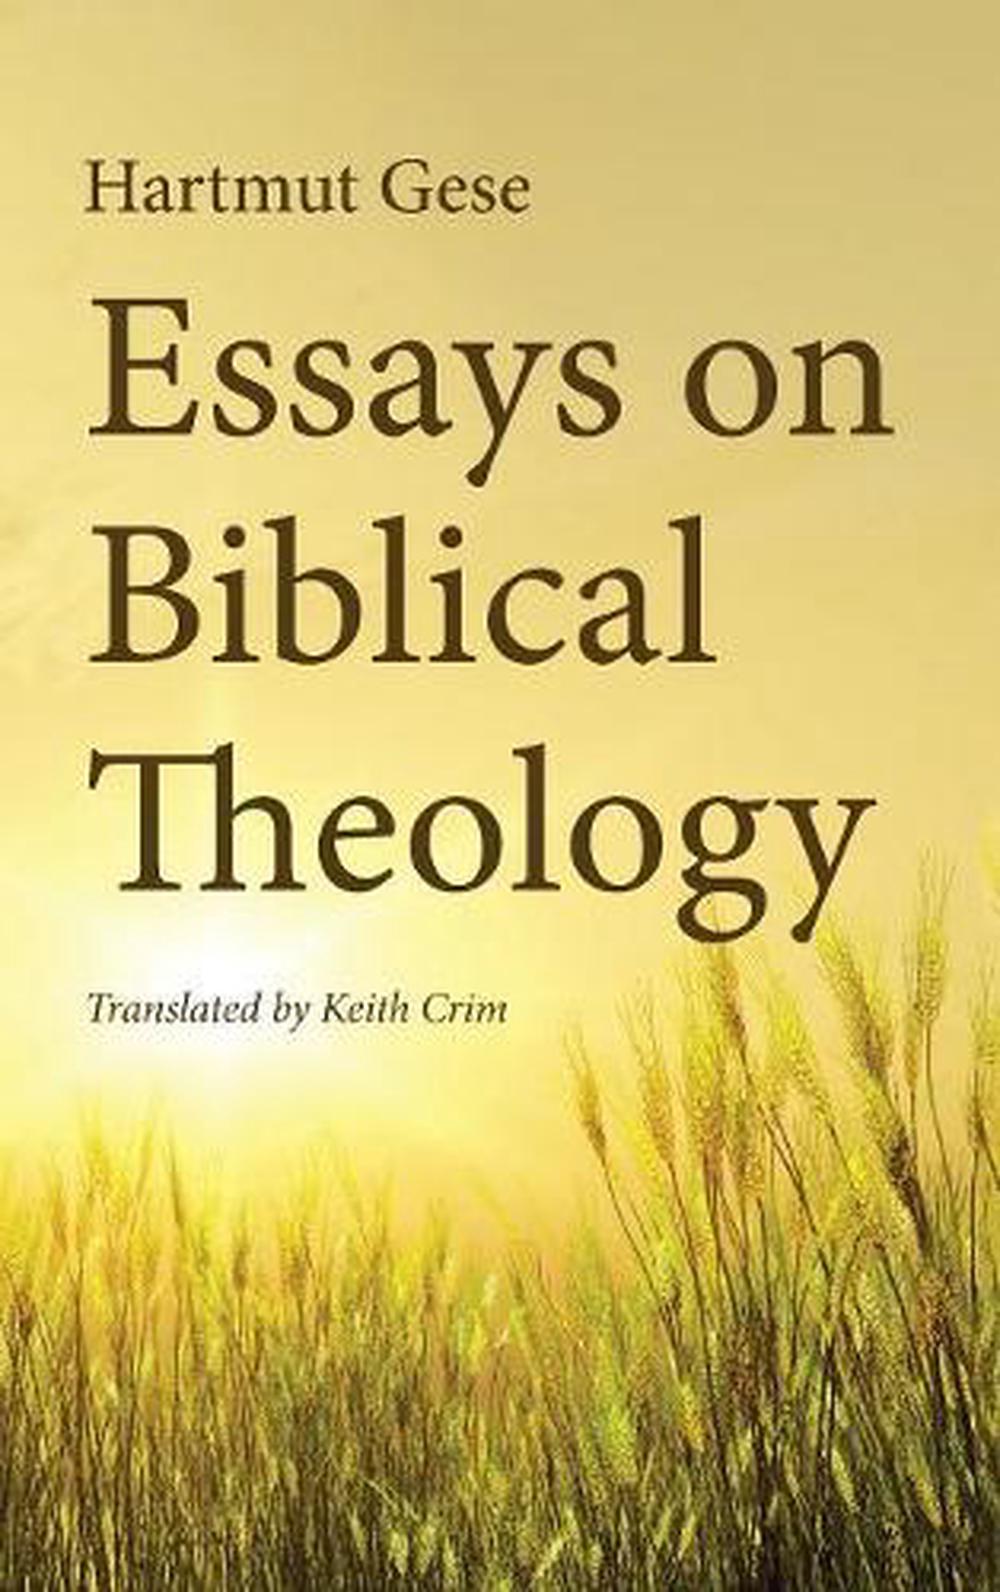 thesis on biblical theology